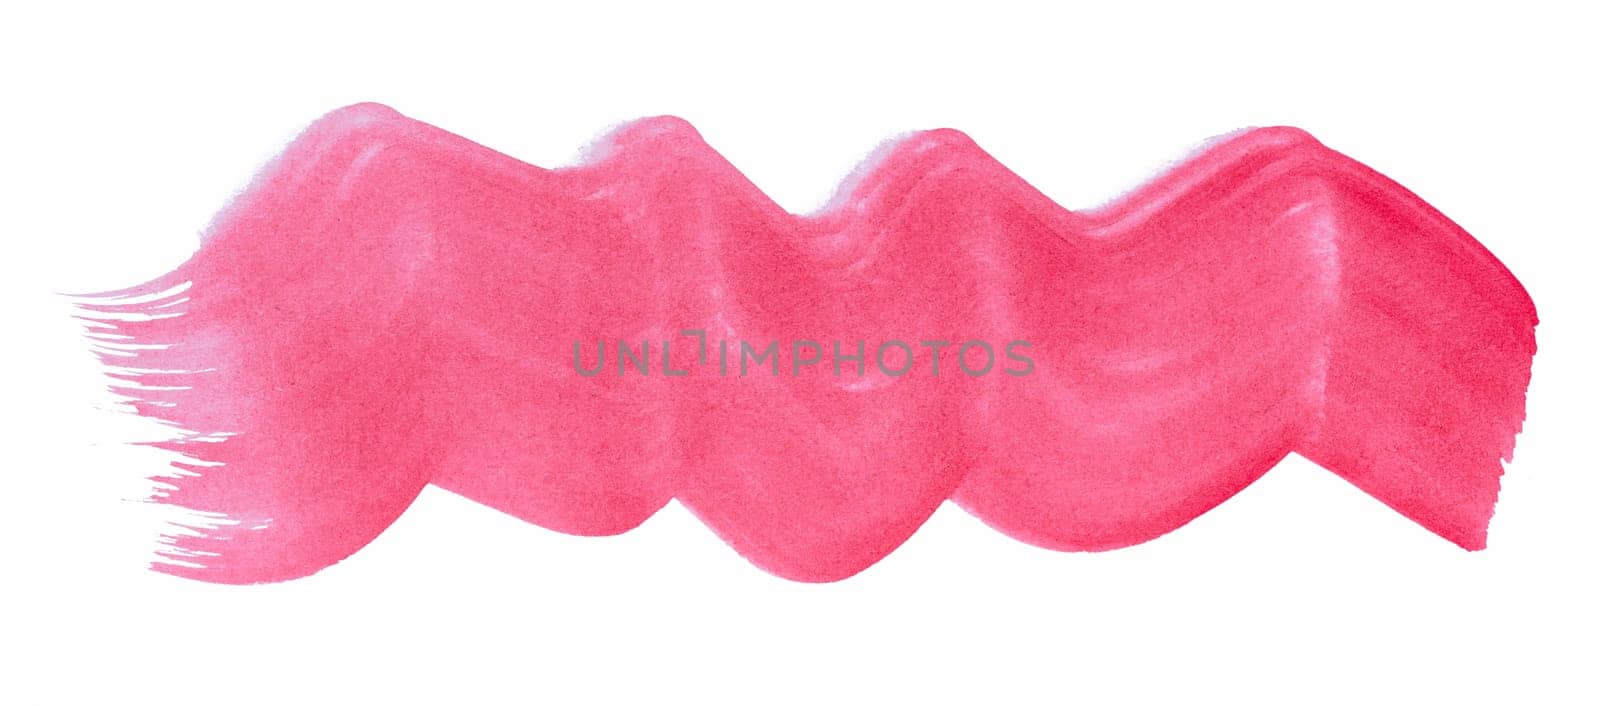 Watercolor brush stroke of red paint, on a white isolated background